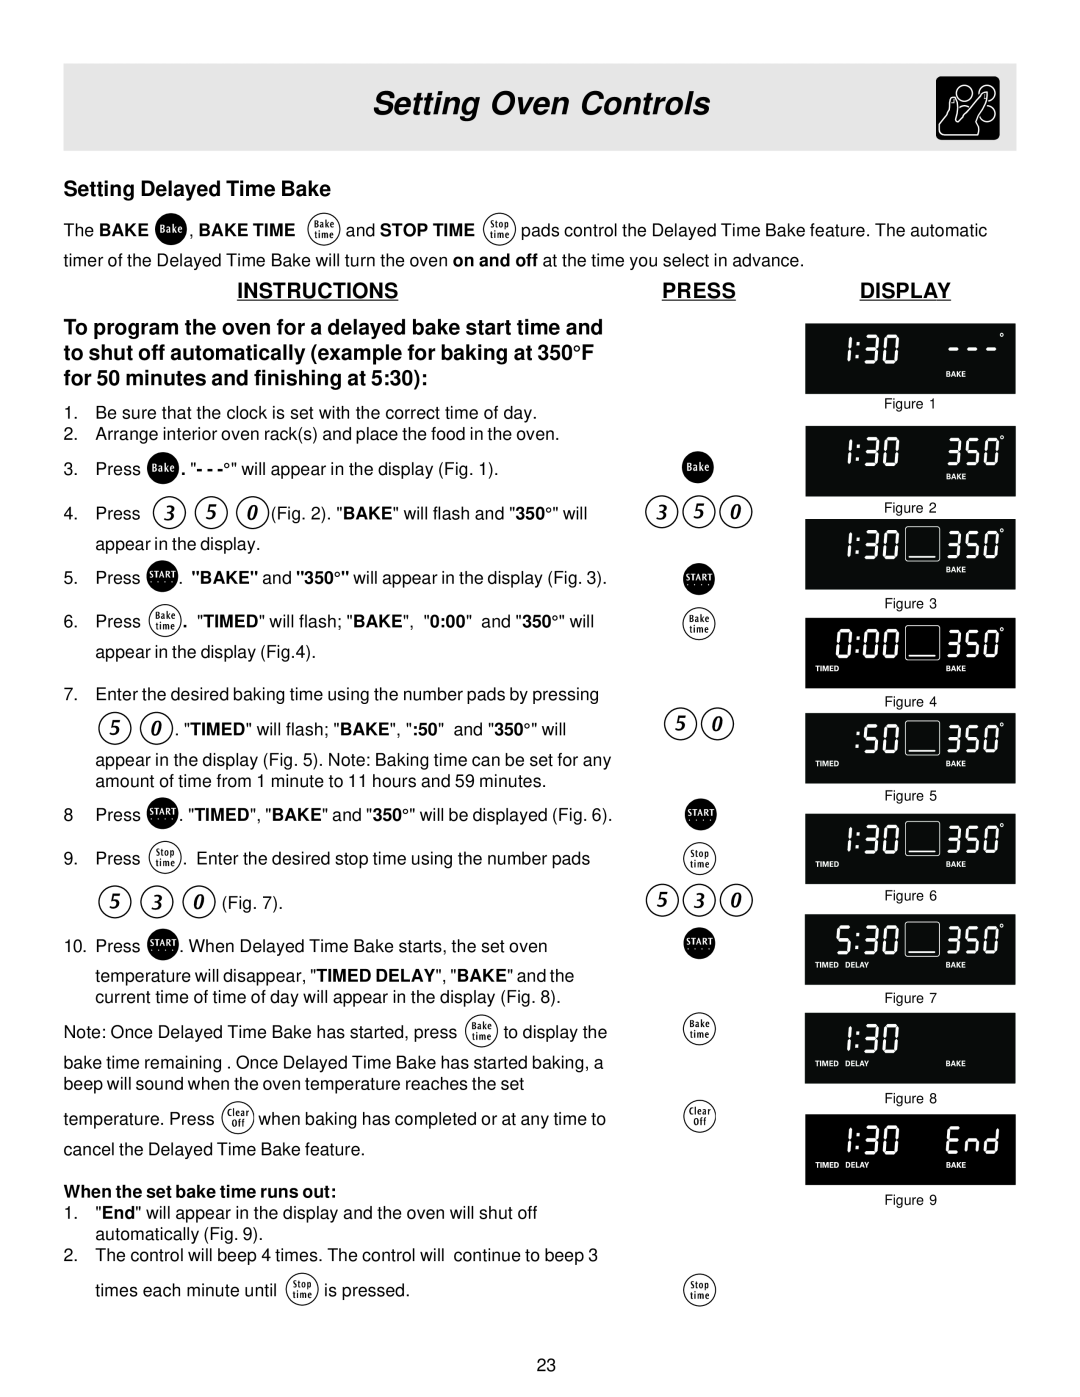 Frigidaire 316257124, ES40 manual Setting Delayed Time Bake, Setting Oven Controls, Instructions, Press, Display 